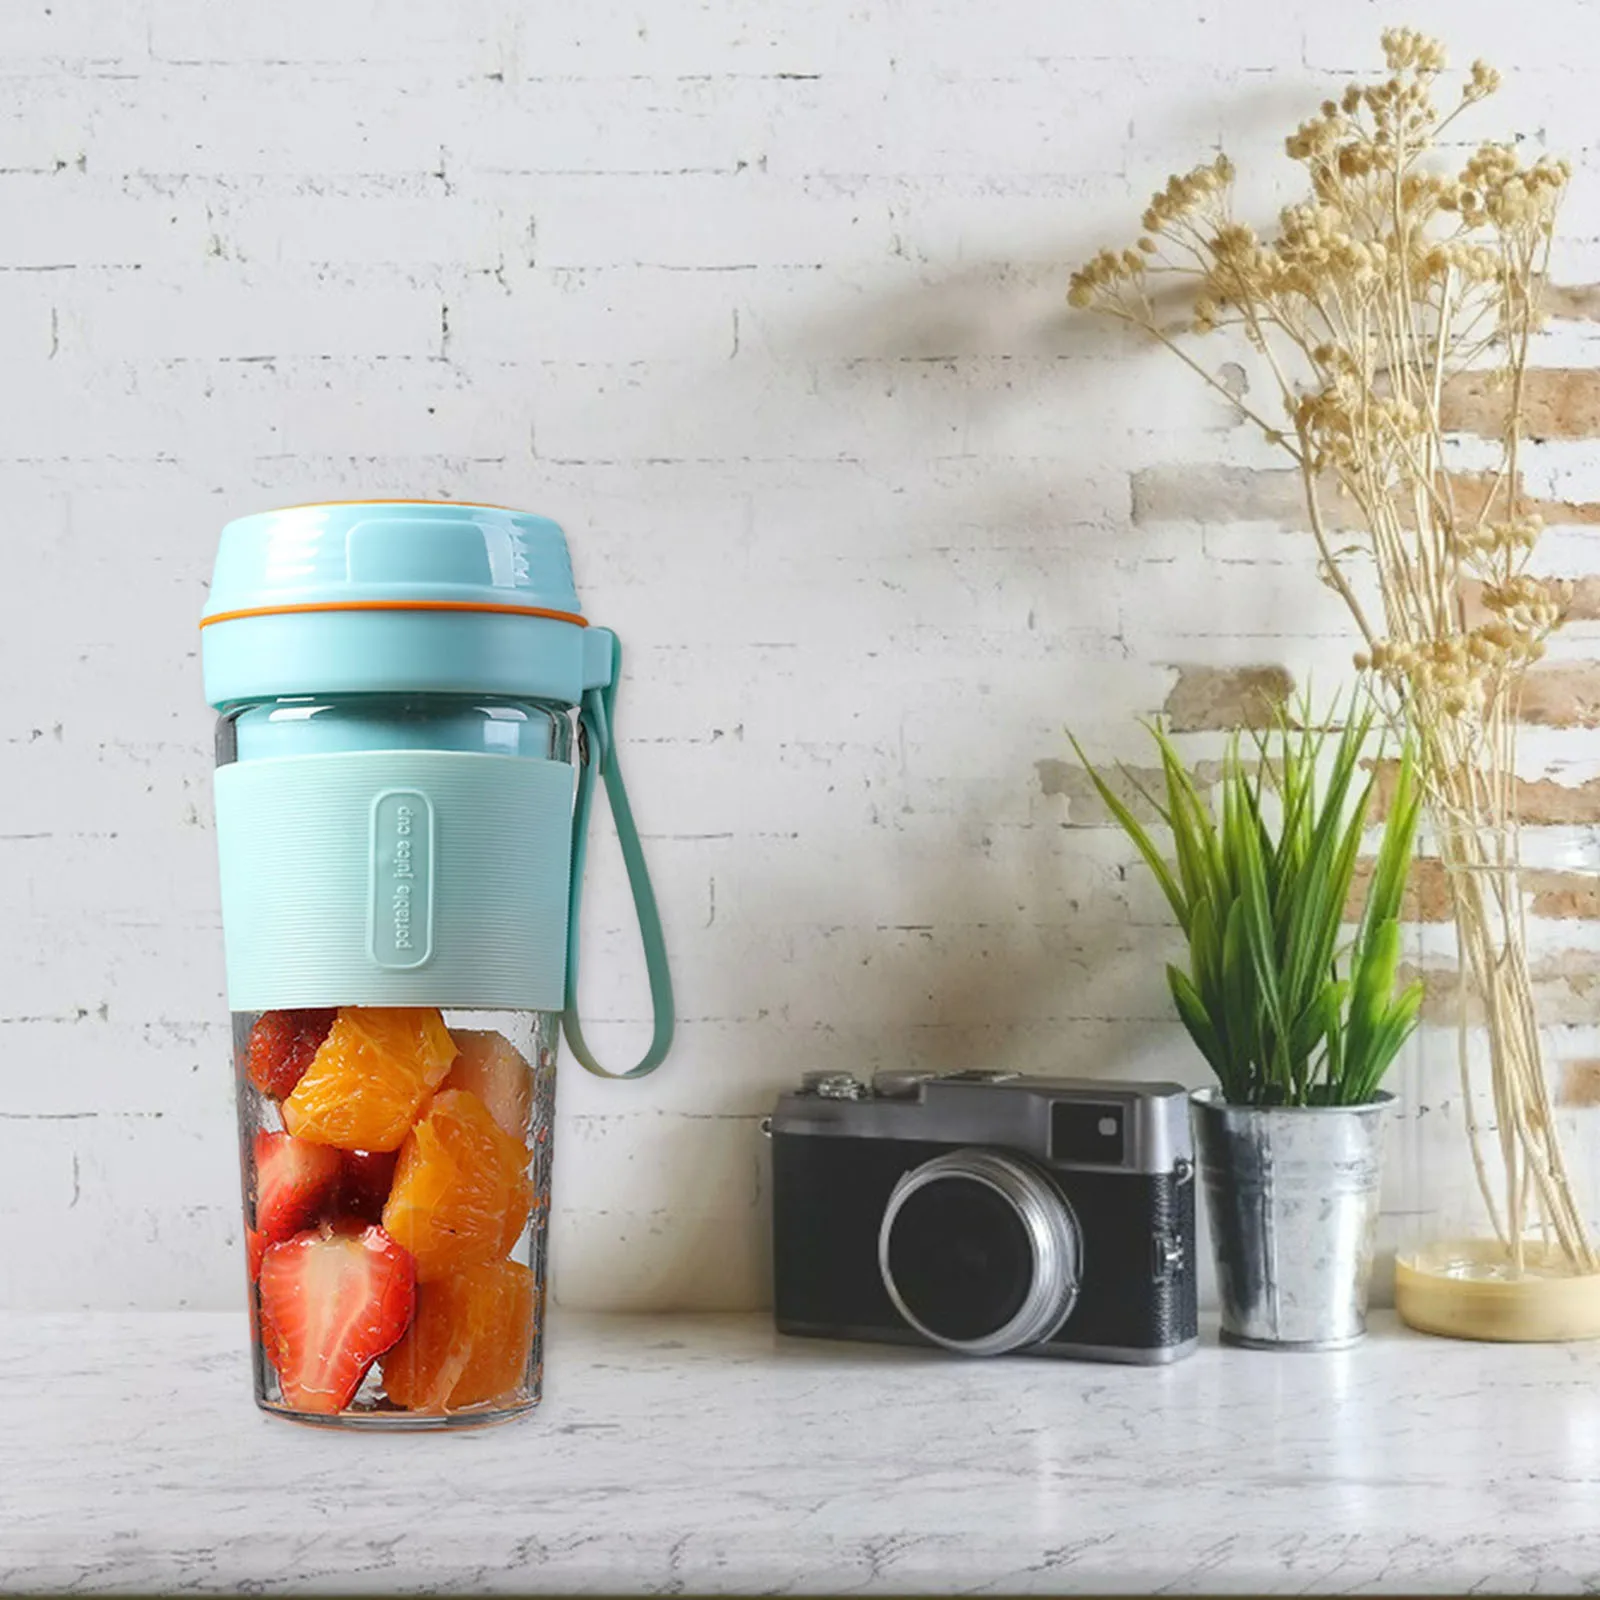 270ml Portable Electric Fruit Juicer USB Rechargeable Smoothie Blender Machine Mini Fruit Mixer Cup Juicing Cup